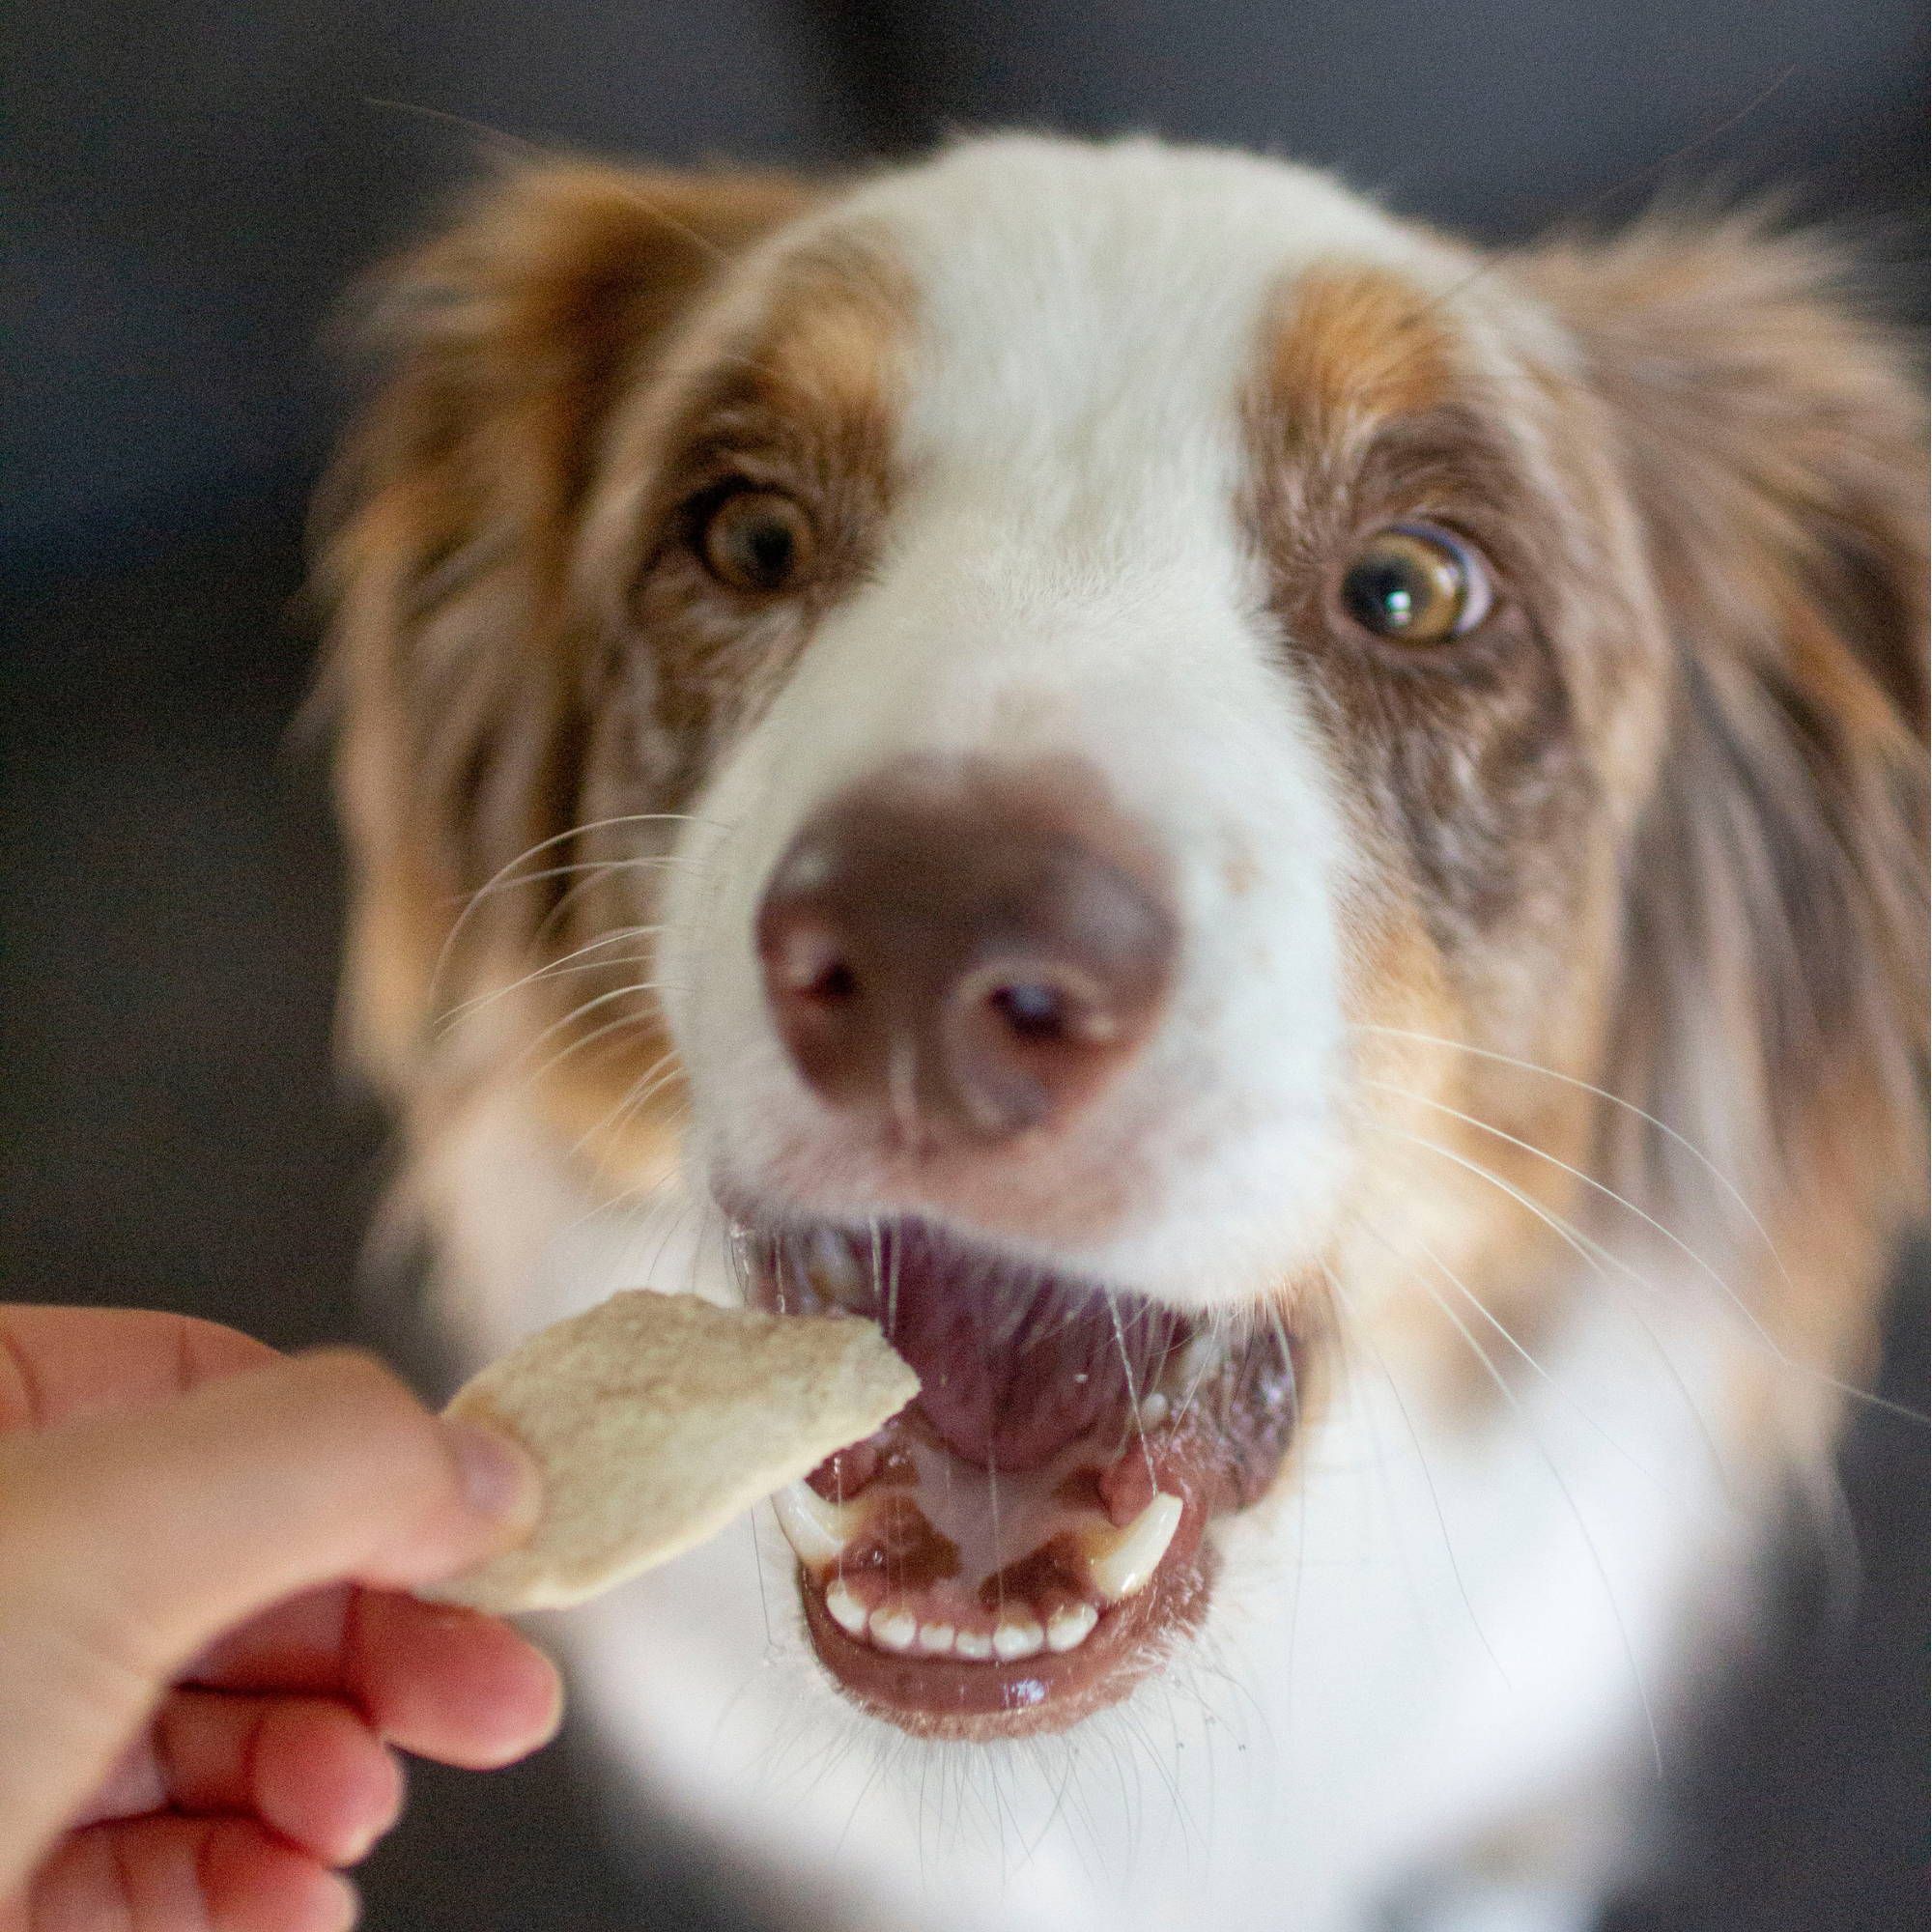 Brown and white dog opens mouth to bite chicken chunk treat fed by human hand.